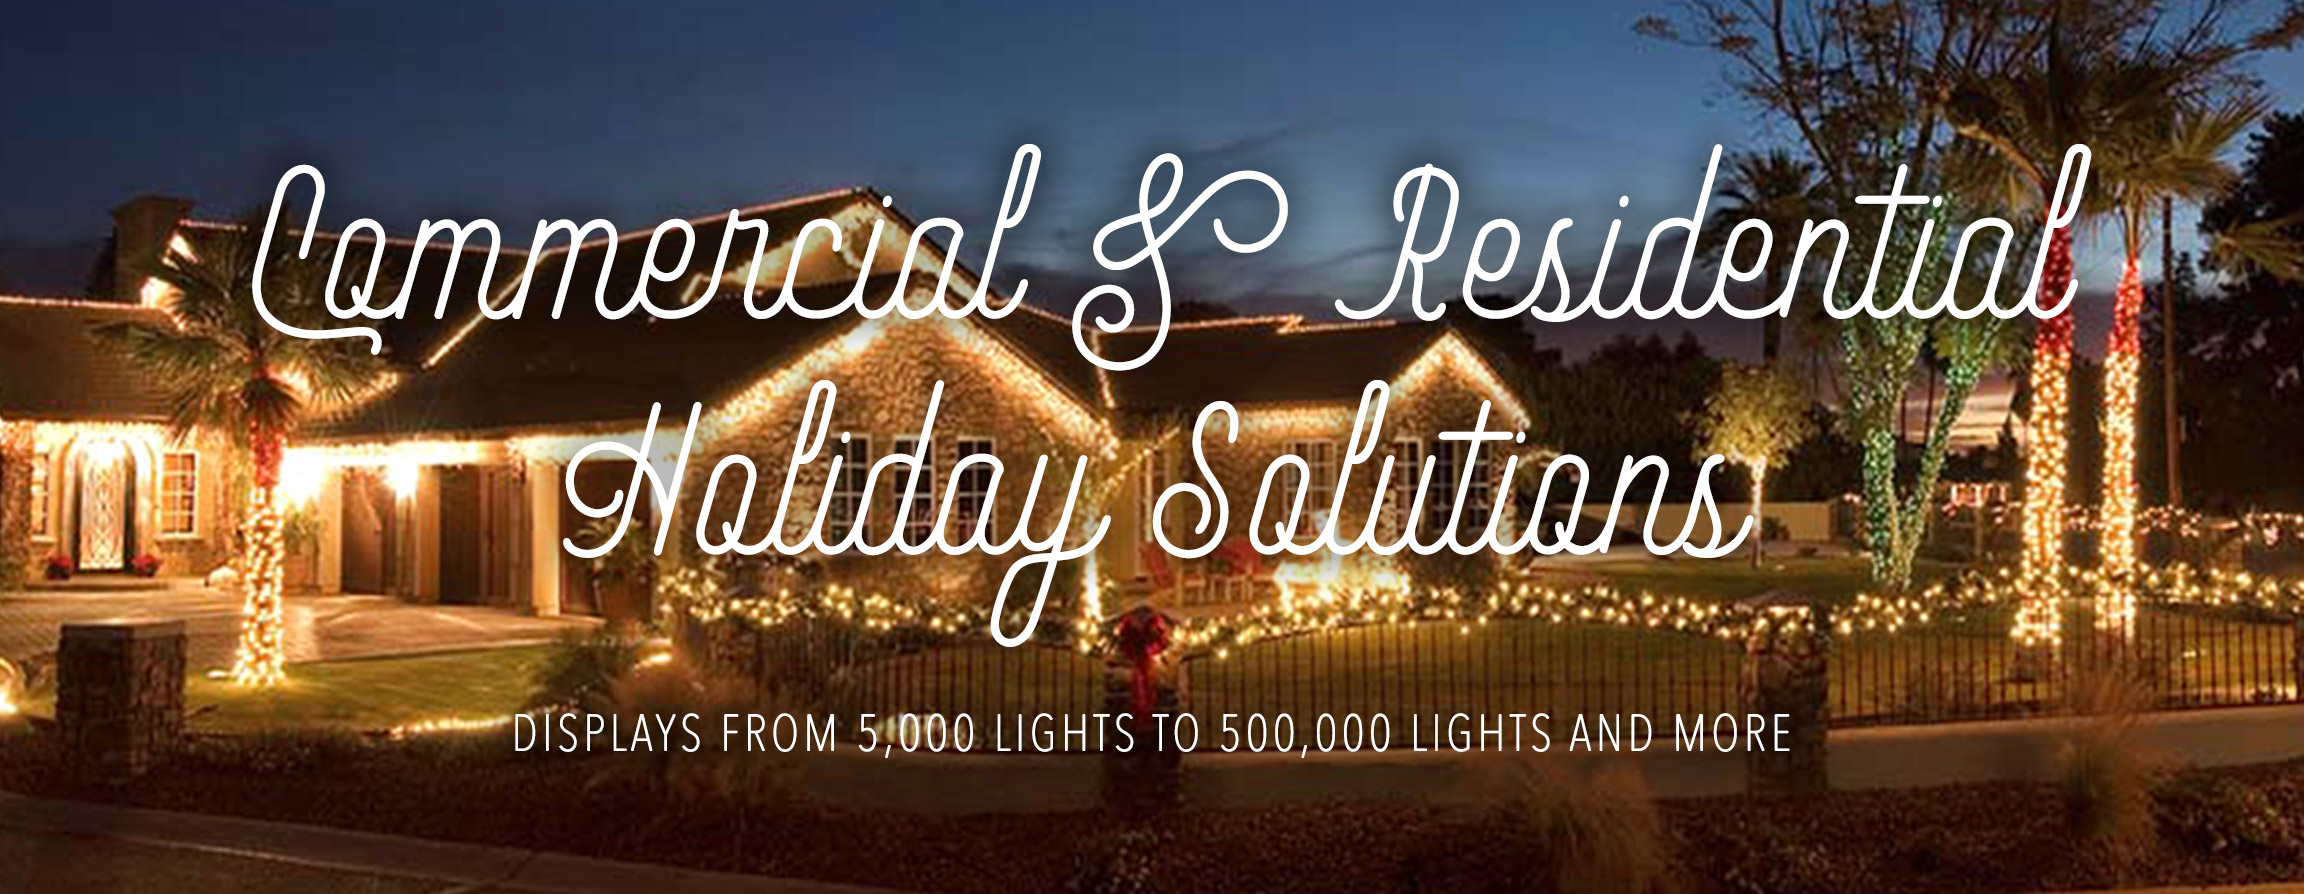 Commercial & Residential Holiday Lighting and Decorating Solutions. Large and small scape displays starting at $799. Custom designs and preset themes available. See what Spirit Lighting can do for YOU!